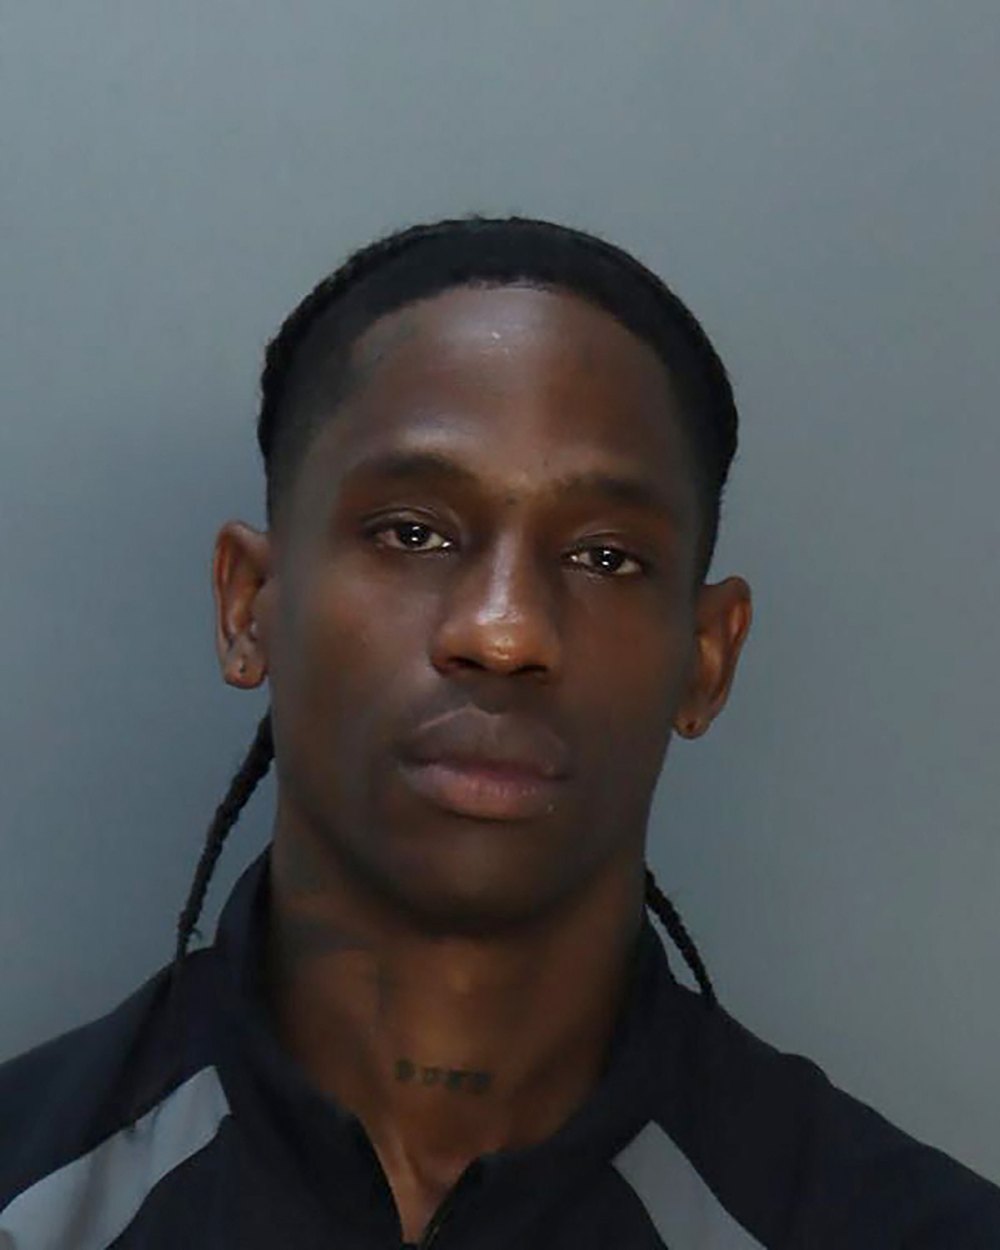 Travis Scott Is Arrested for Disorderly Intoxication and Trespassing on Property in Miami